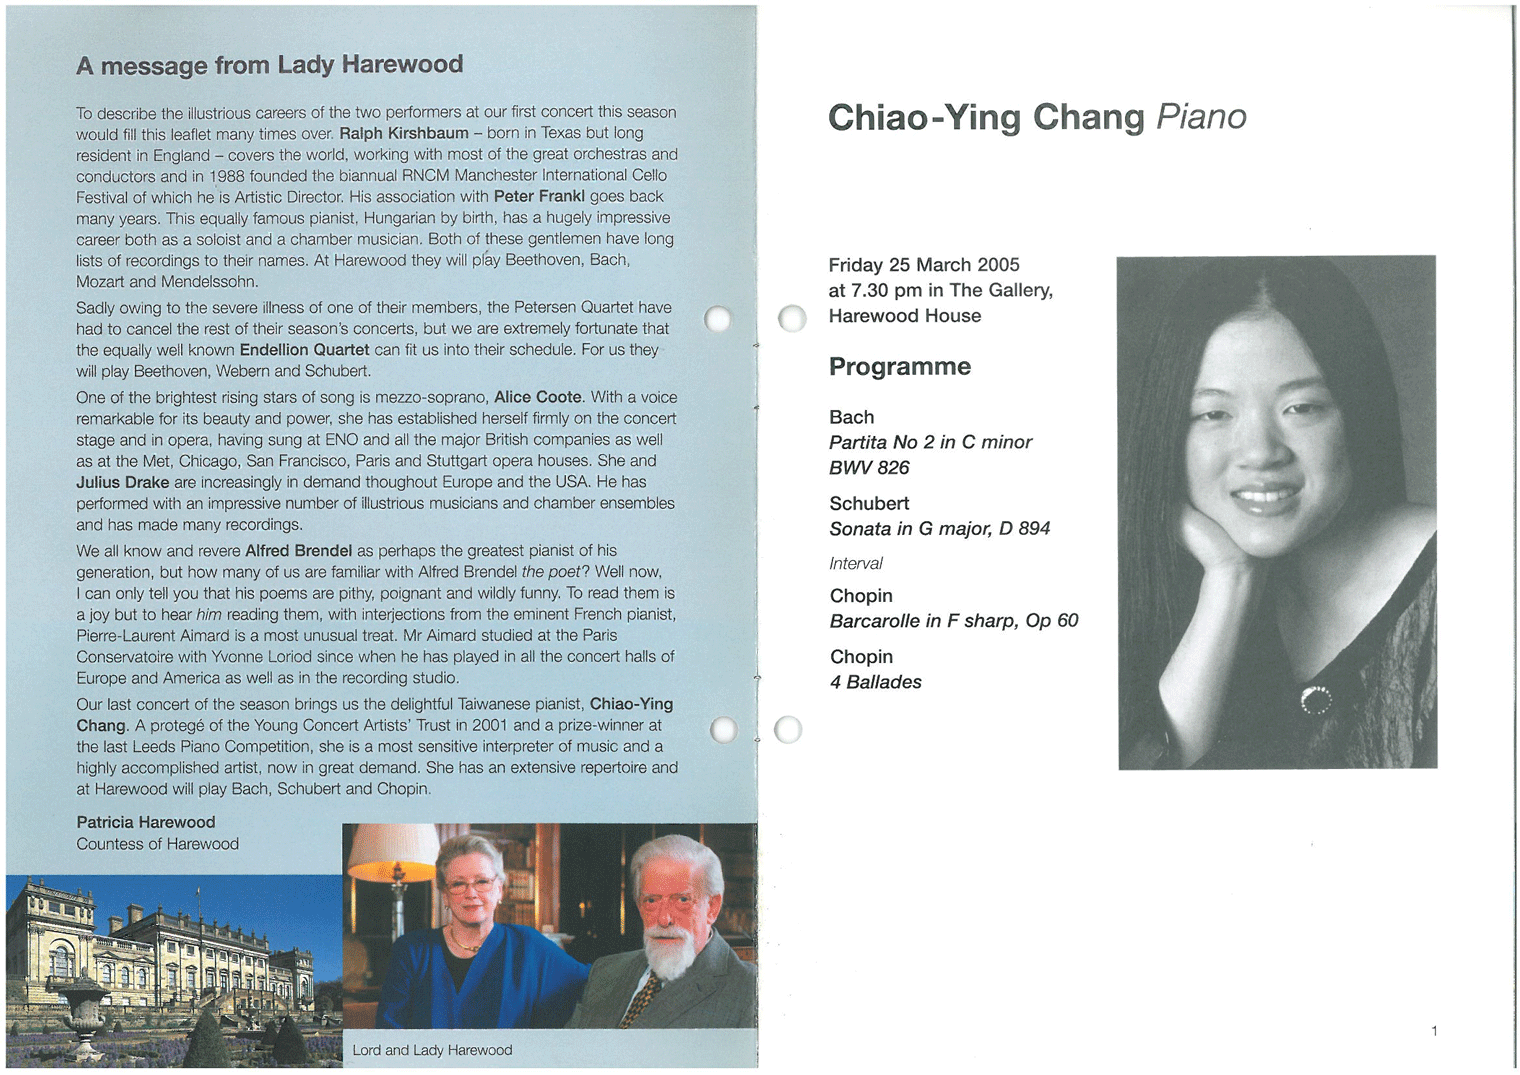 Programme, 2005, Music at Harewood